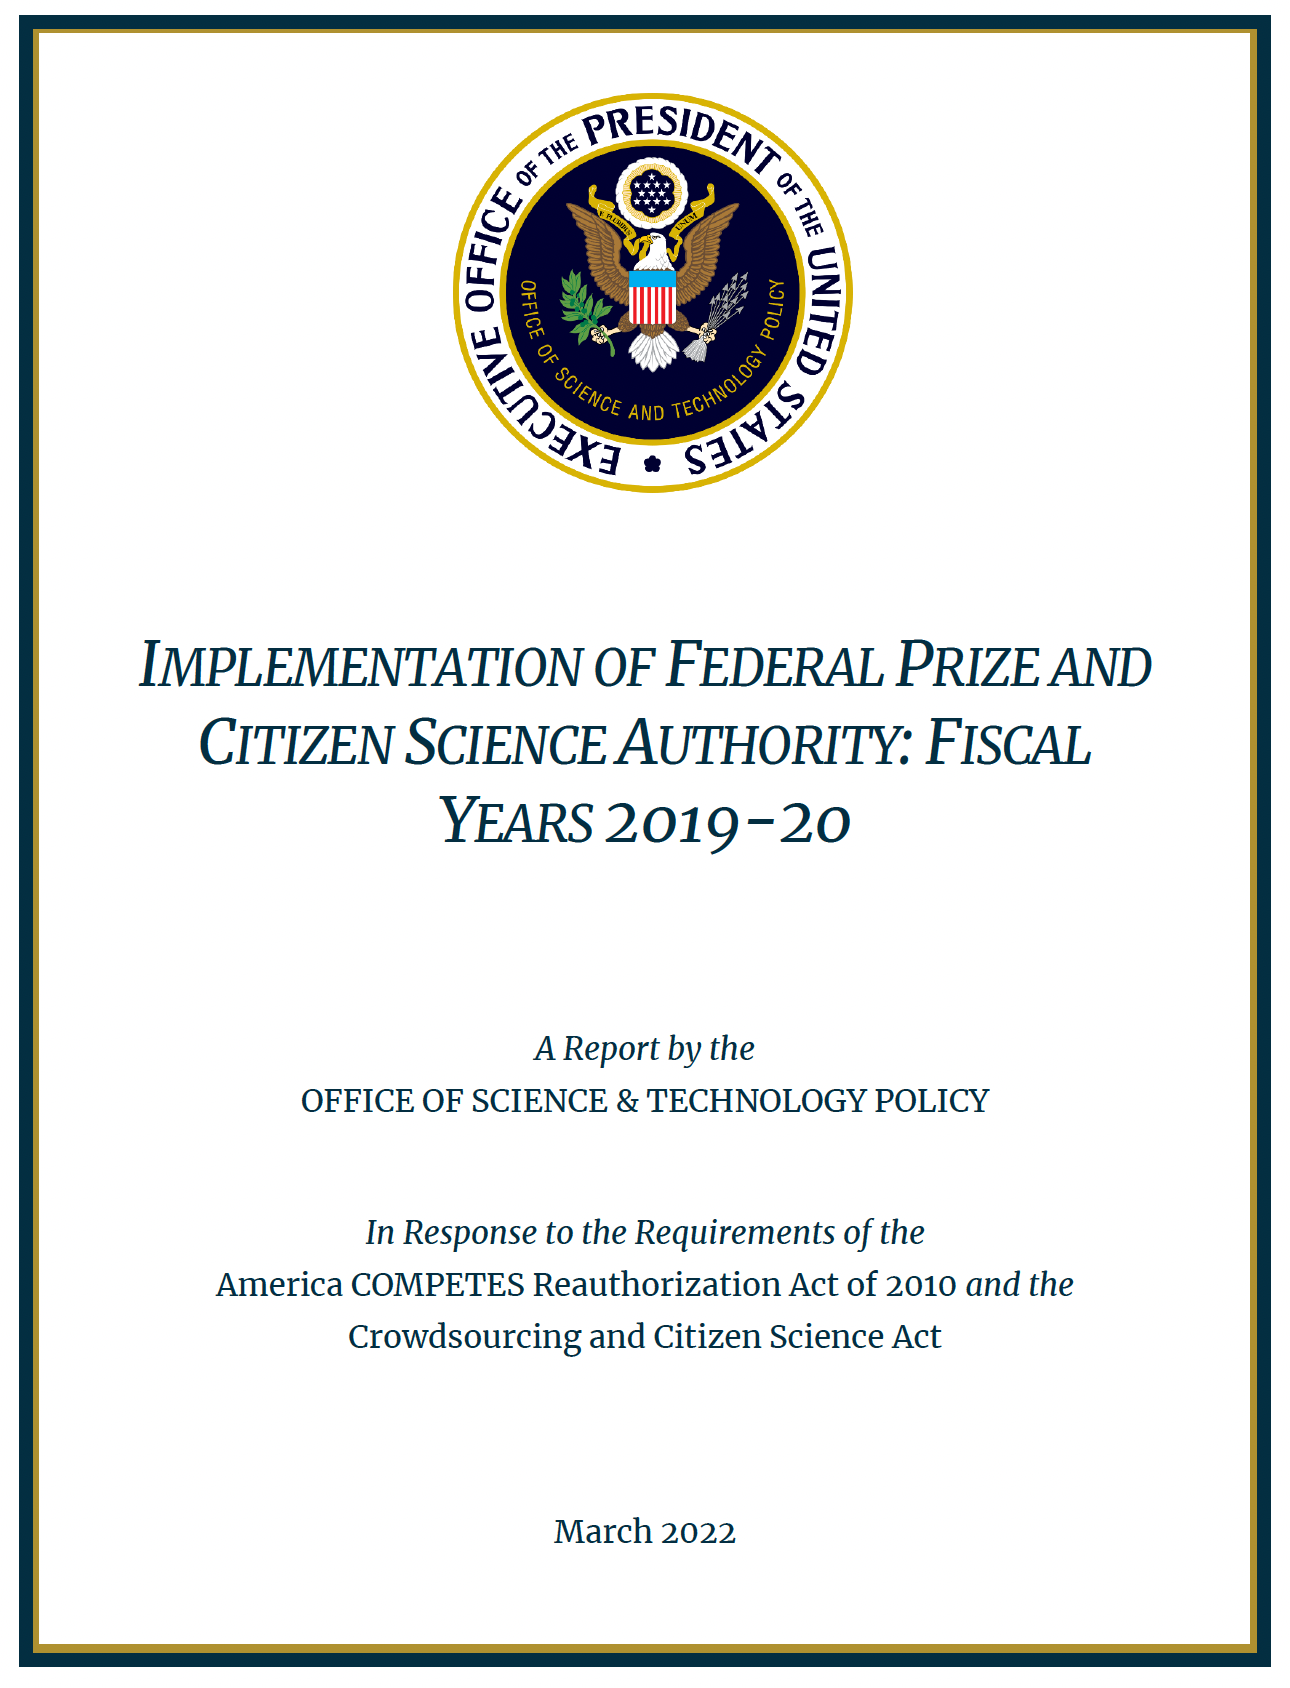 Report on the Implementation of Federal Prize and Citizen Science Authority | Photo courtesy of White House OSTP